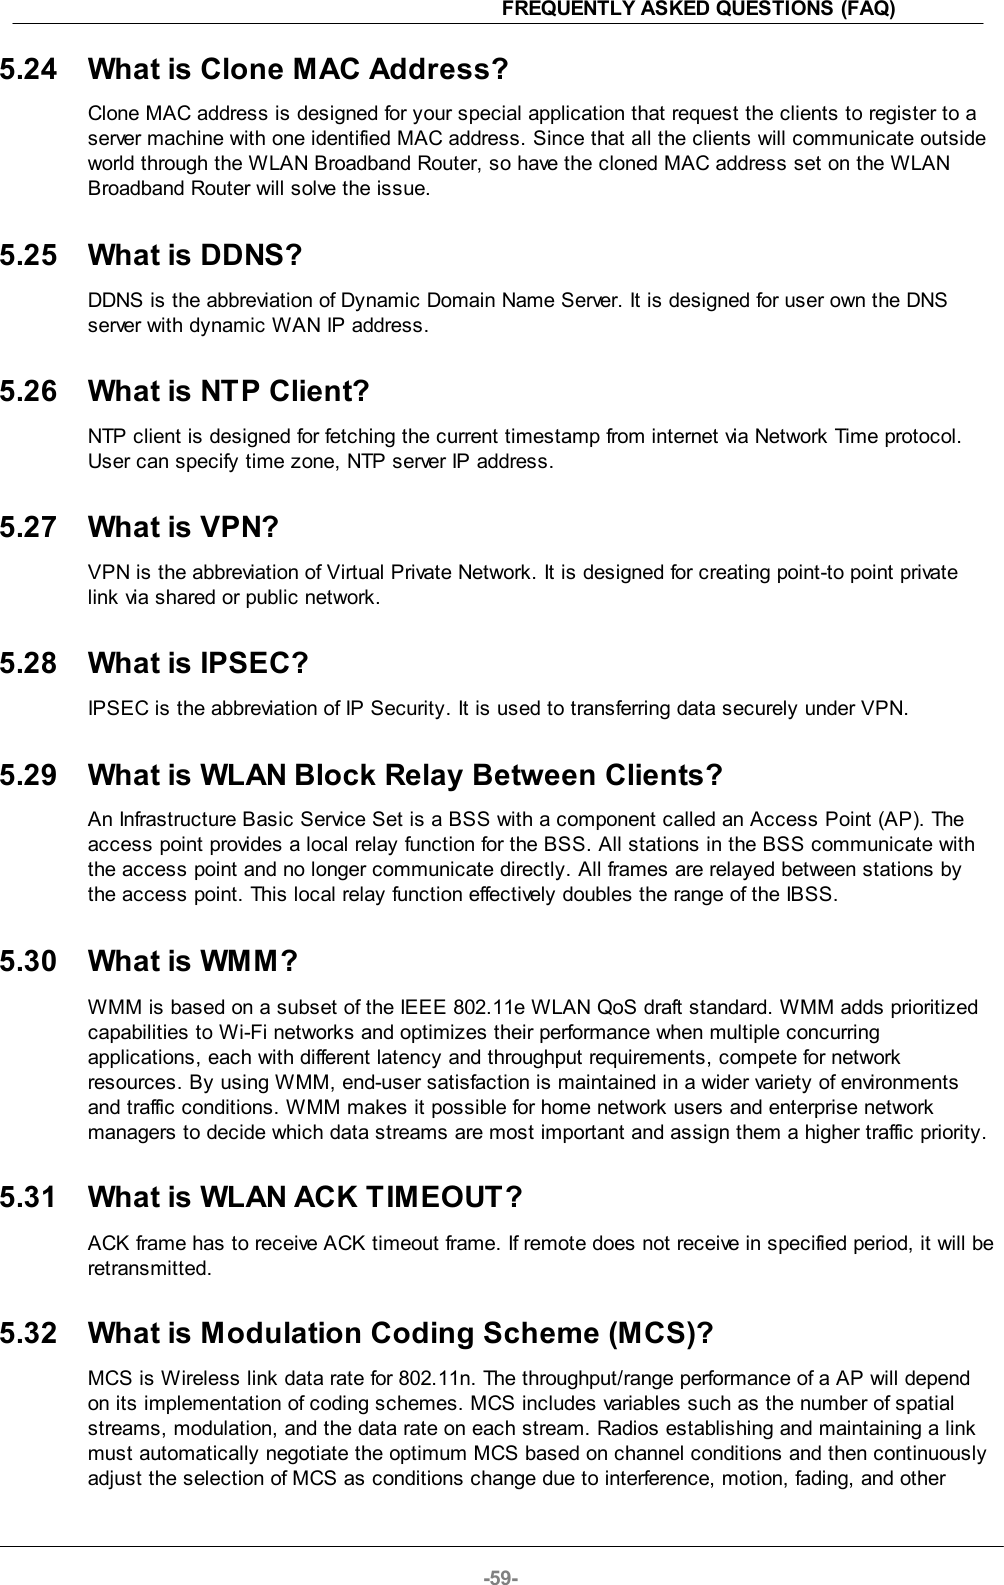 FREQUENTLY ASKED QUESTIONS (FAQ)-59-5.24 What is Clone MAC Address?Clone MAC address is designed for your special application that request the clients to register to aserver machine with one identified MAC address. Since that all the clients will communicate outsideworld through the WLAN Broadband Router, so have the cloned MAC address set on the WLANBroadband Router will solve the issue.5.25 What is DDNS?DDNS is the abbreviation of Dynamic Domain Name Server. It is designed for user own the DNSserver with dynamic WAN IP address.5.26 What is NTP Client?NTP client is designed for fetching the current timestamp from internet via Network Time protocol.User can specify time zone, NTP server IP address.5.27 What is VPN?VPN is the abbreviation of Virtual Private Network. It is designed for creating point-to point privatelink via shared or public network.5.28 What is IPSEC?IPSEC is the abbreviation of IP Security. It is used to transferring data securely under VPN.5.29 What is WLAN Block Relay Between Clients?An Infrastructure Basic Service Set is a BSS with a component called an Access Point (AP). Theaccess point provides a local relay function for the BSS. All stations in the BSS communicate withthe access point and no longer communicate directly. All frames are relayed between stations bythe access point. This local relay function effectively doubles the range of the IBSS.5.30 What is WMM?WMM is based on a subset of the IEEE 802.11e WLAN QoS draft standard. WMM adds prioritizedcapabilities to Wi-Fi networks and optimizes their performance when multiple concurringapplications, each with different latency and throughput requirements, compete for networkresources. By using WMM, end-user satisfaction is maintained in a wider variety of environmentsand traffic conditions. WMM makes it possible for home network users and enterprise networkmanagers to decide which data streams are most important and assign them a higher traffic priority.5.31 What is WLAN ACK TIMEOUT?ACK frame has to receive ACK timeout frame. If remote does not receive in specified period, it will beretransmitted.5.32 What is Modulation Coding Scheme (MCS)?MCS is Wireless link data rate for 802.11n. The throughput/range performance of a AP will dependon its implementation of coding schemes. MCS includes variables such as the number of spatialstreams, modulation, and the data rate on each stream. Radios establishing and maintaining a linkmust automatically negotiate the optimum MCS based on channel conditions and then continuouslyadjust the selection of MCS as conditions change due to interference, motion, fading, and other